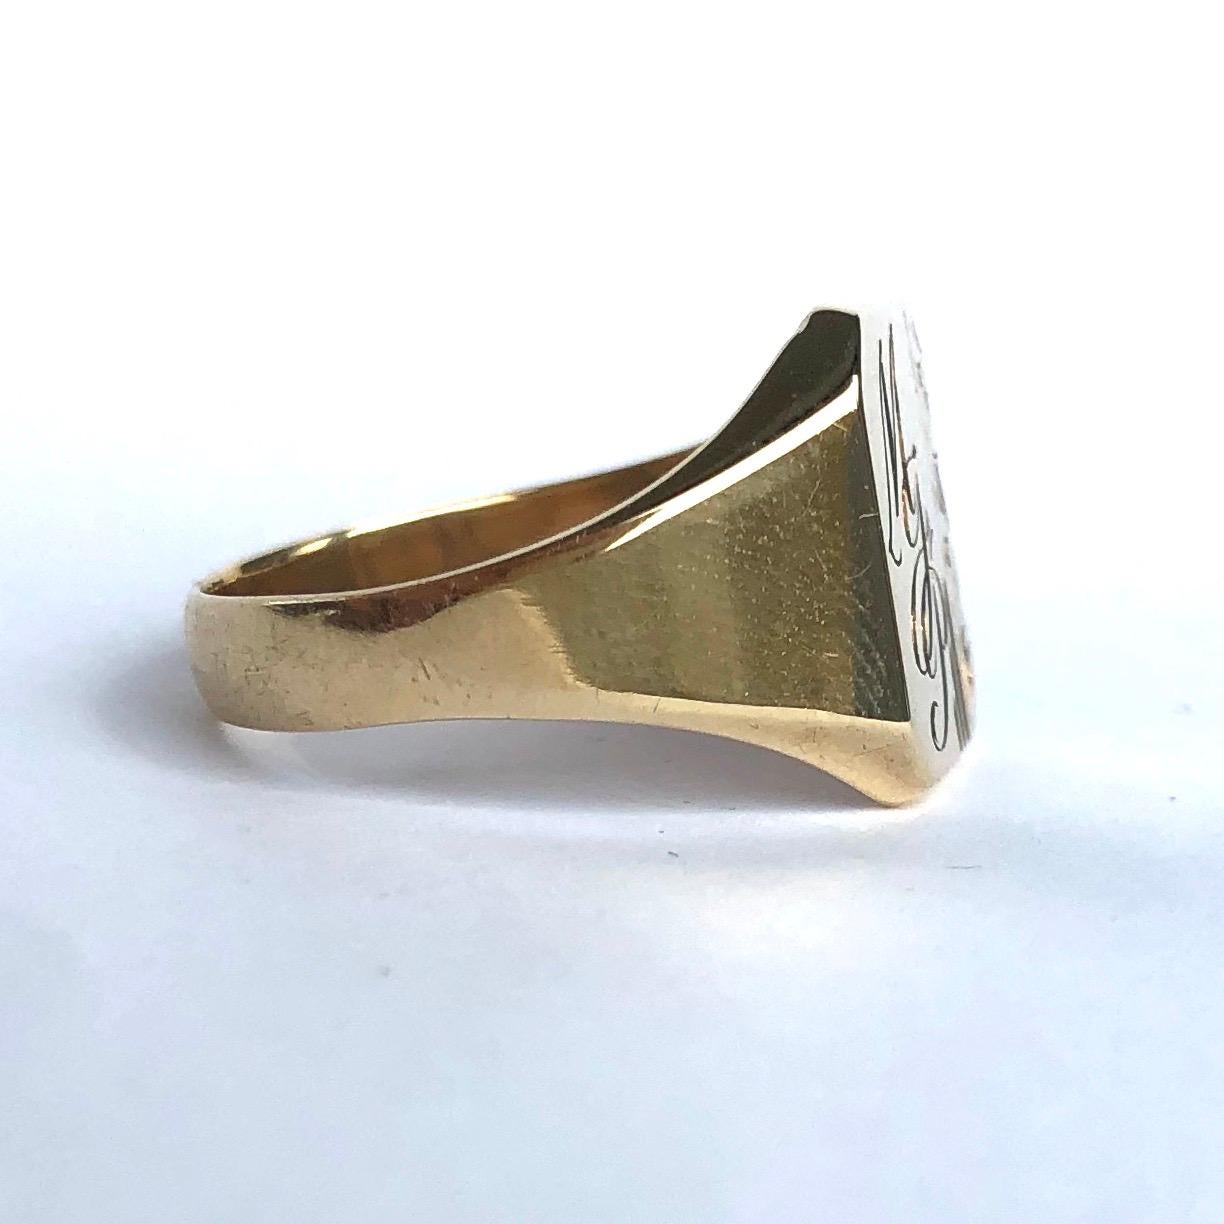 This lovely 9ct gold ring has the initials M.J.P engraved into the face of it with some subtle scroll detail also. 

Ring Size: R 1/4 or 8 3/4 
Face Dimensions: 13x11mm 

Weight: 3.13g